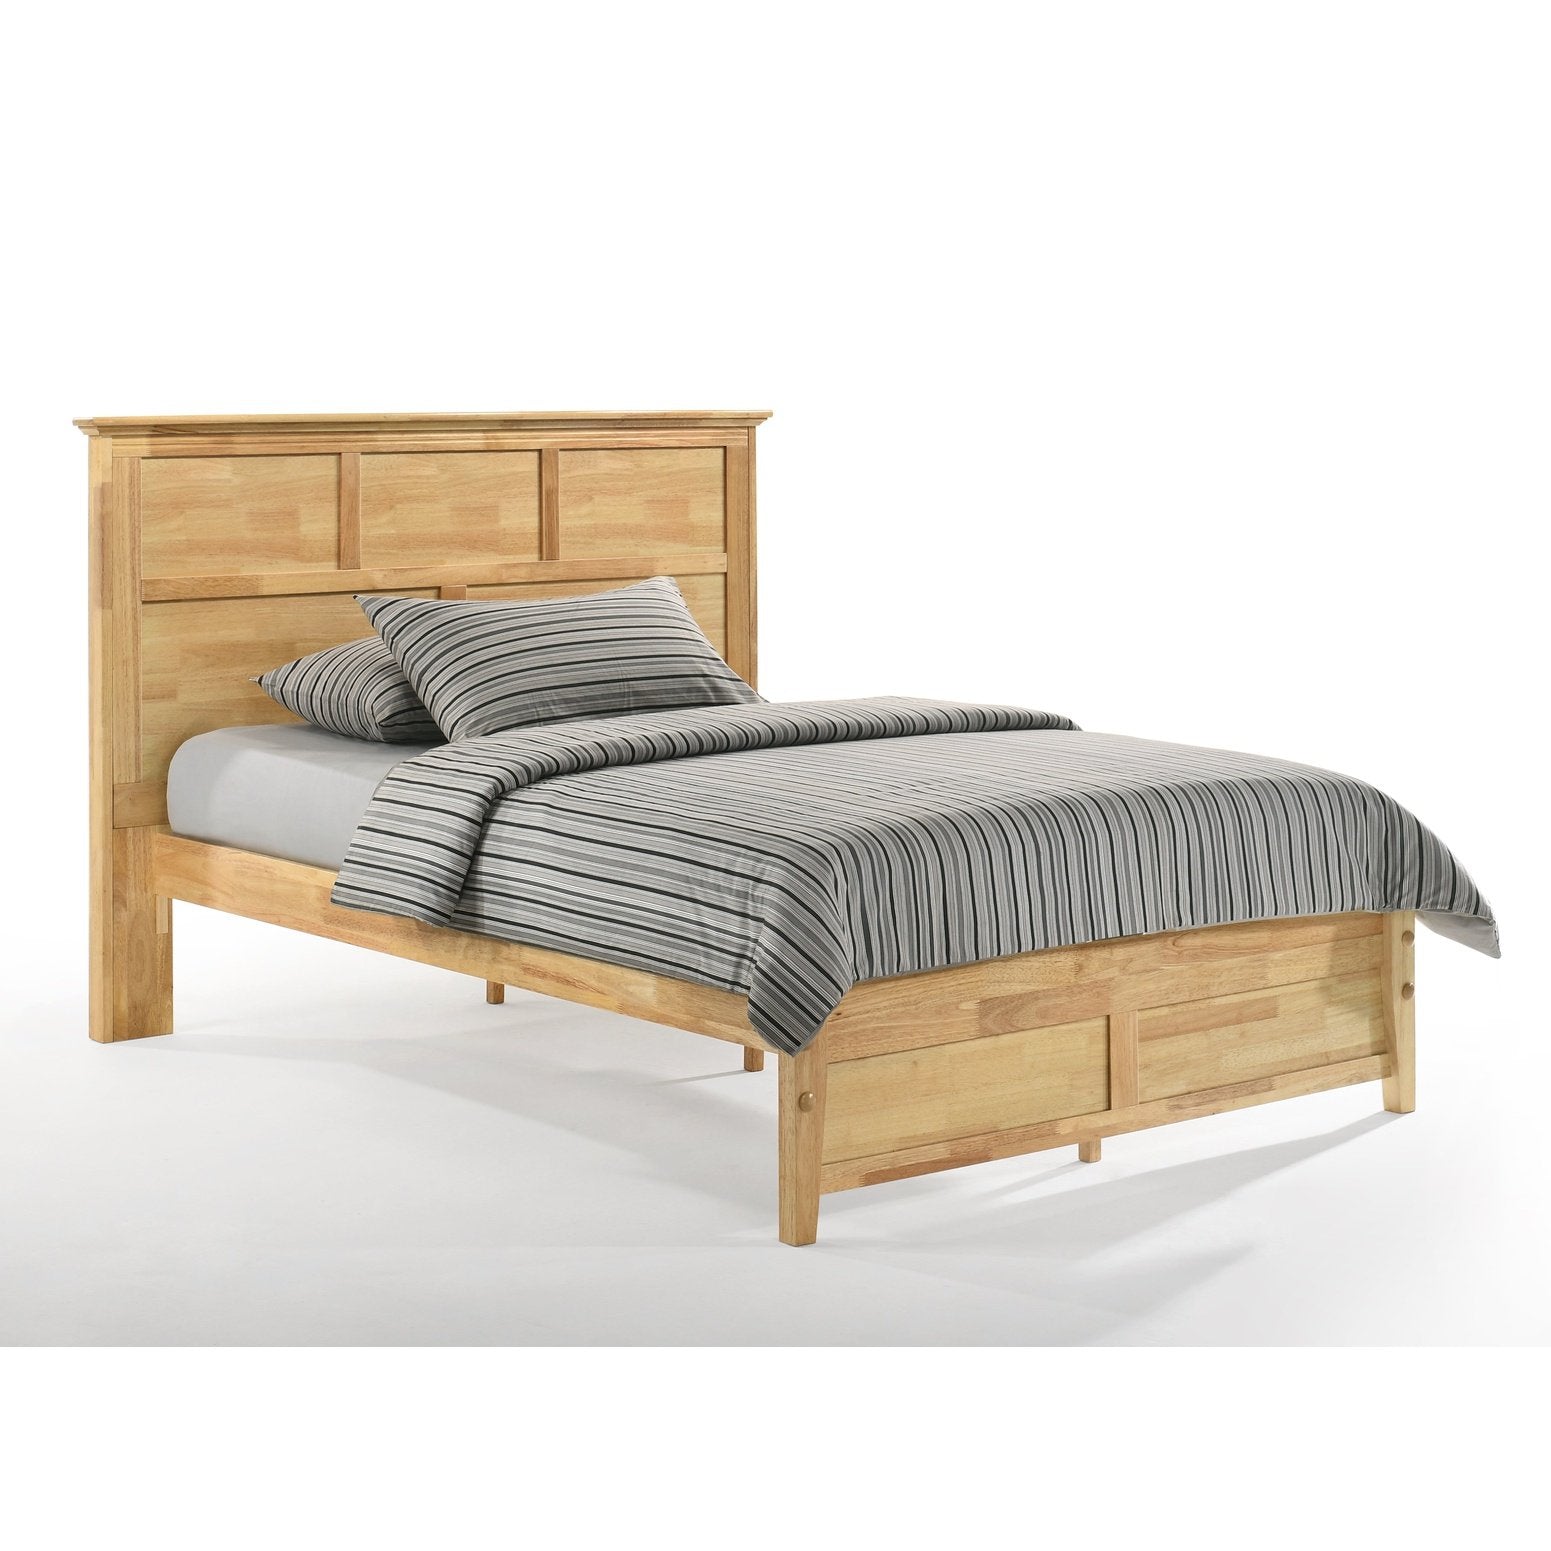 Night and Day Furniture Tarragon Complete Bed P-Series